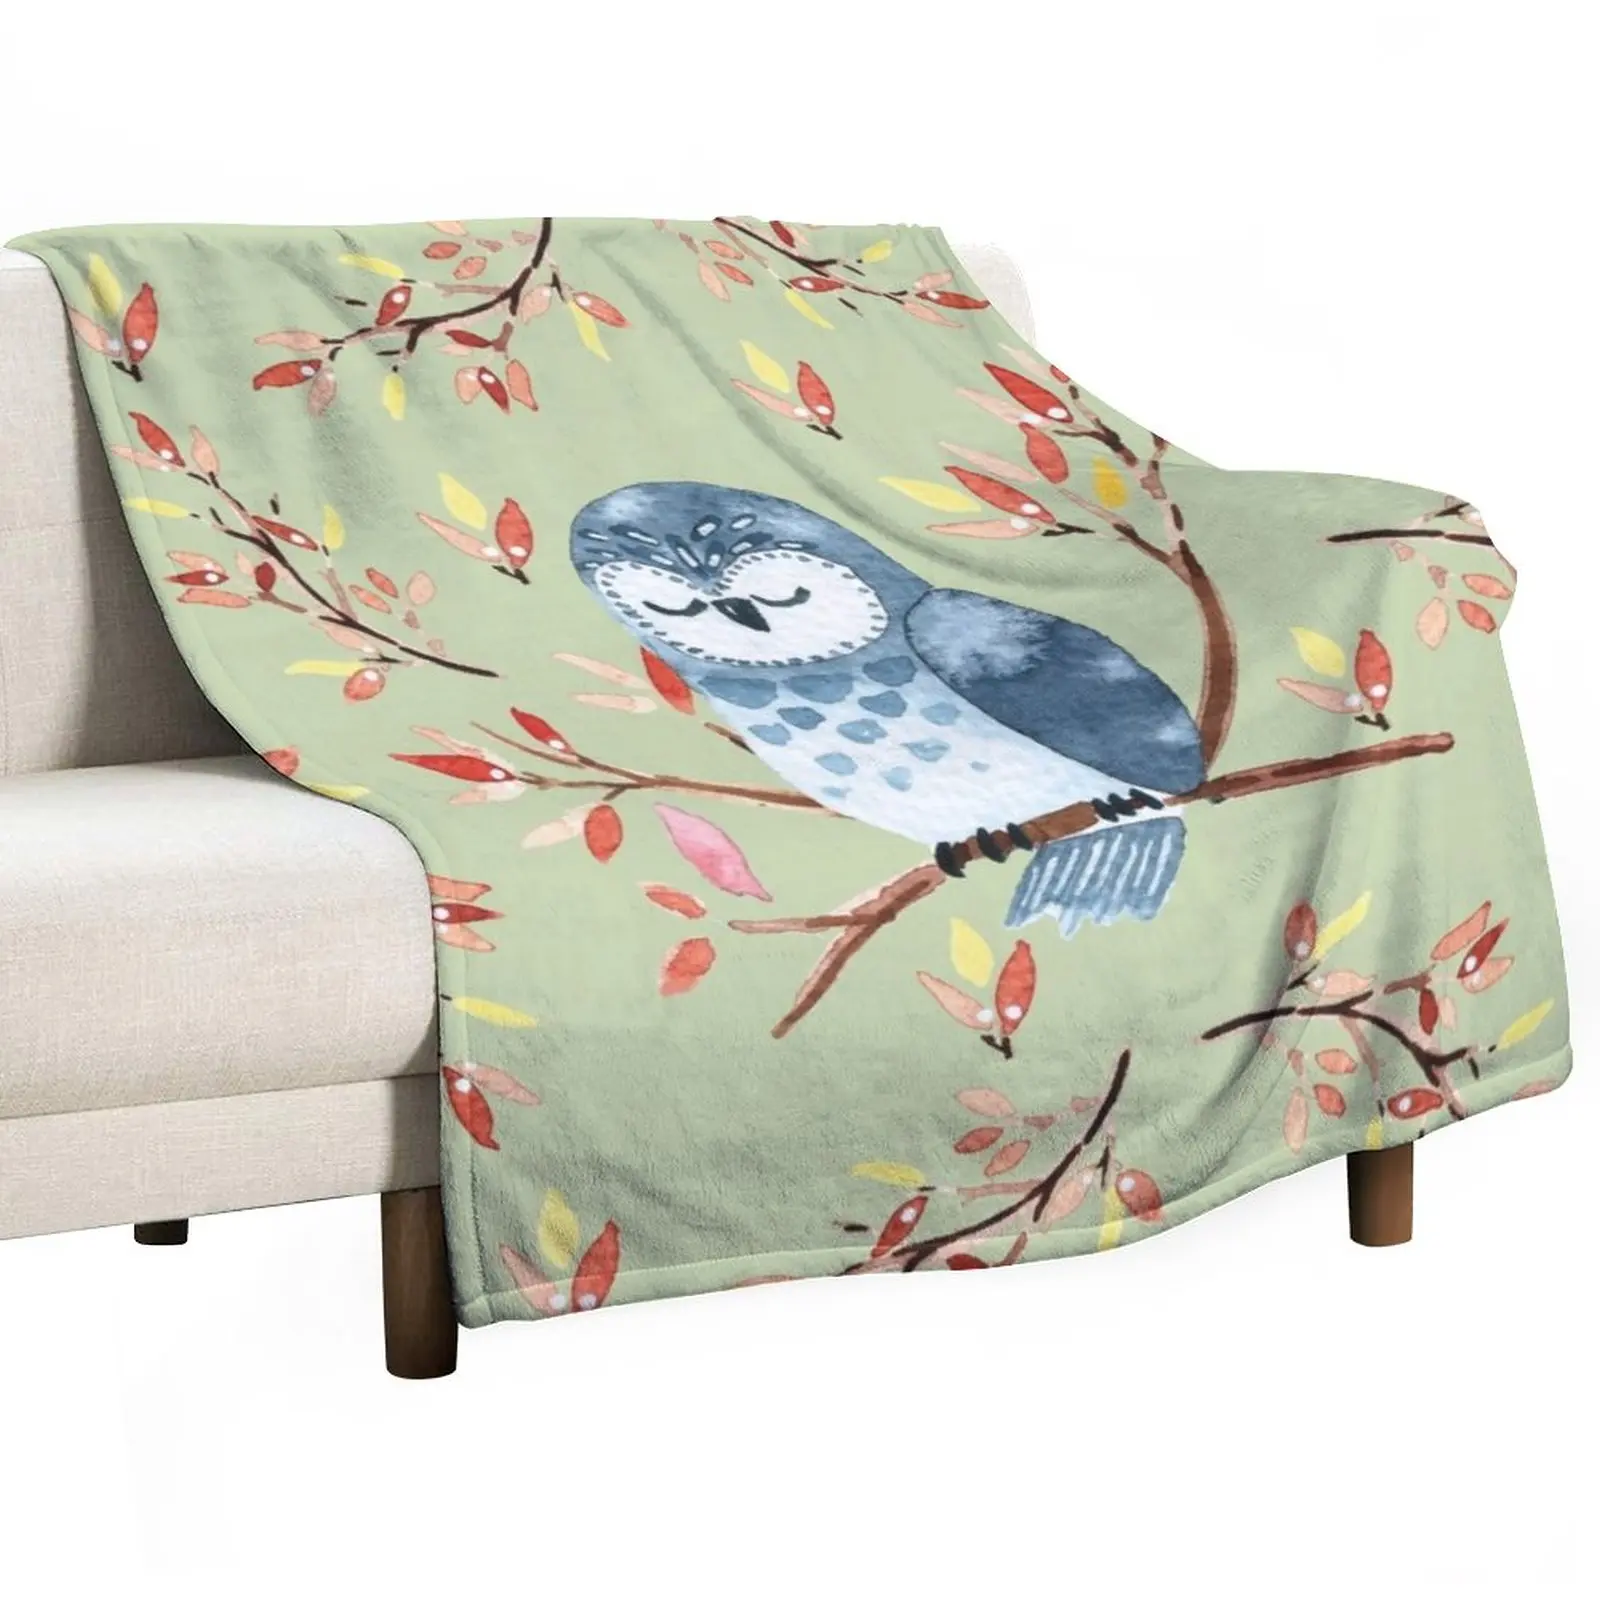 

Cute watercolor owl and autumn leaves, green background Throw Blanket Picnic Blanket Decorative Blankets Blanket Sofa